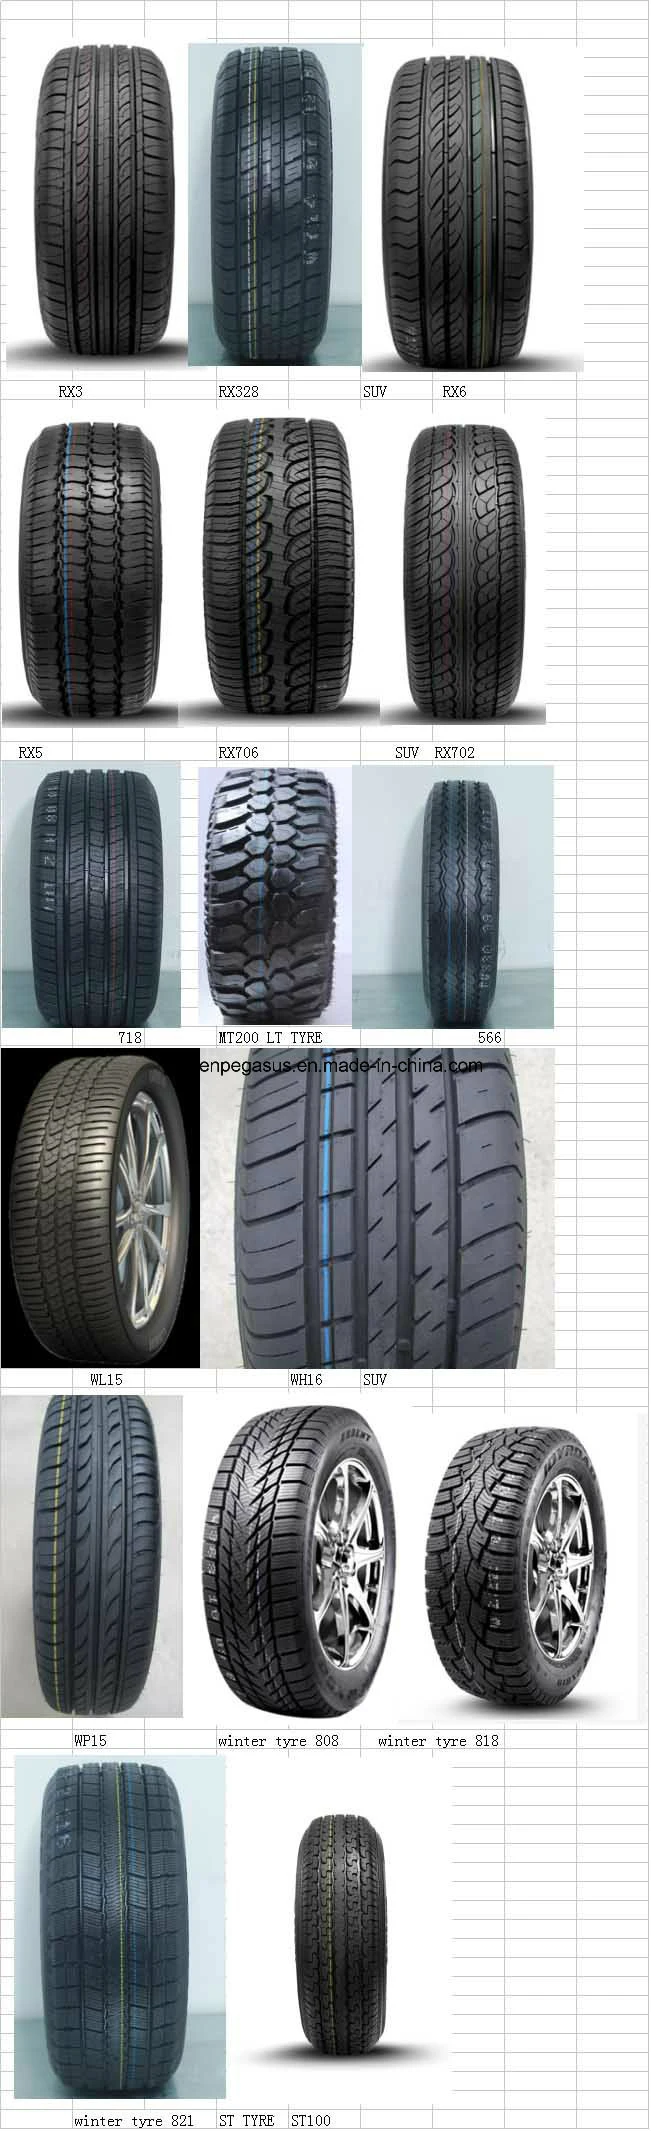 Winter Tire, Snow Tire with All Certificate (ECE, Reach, Label)